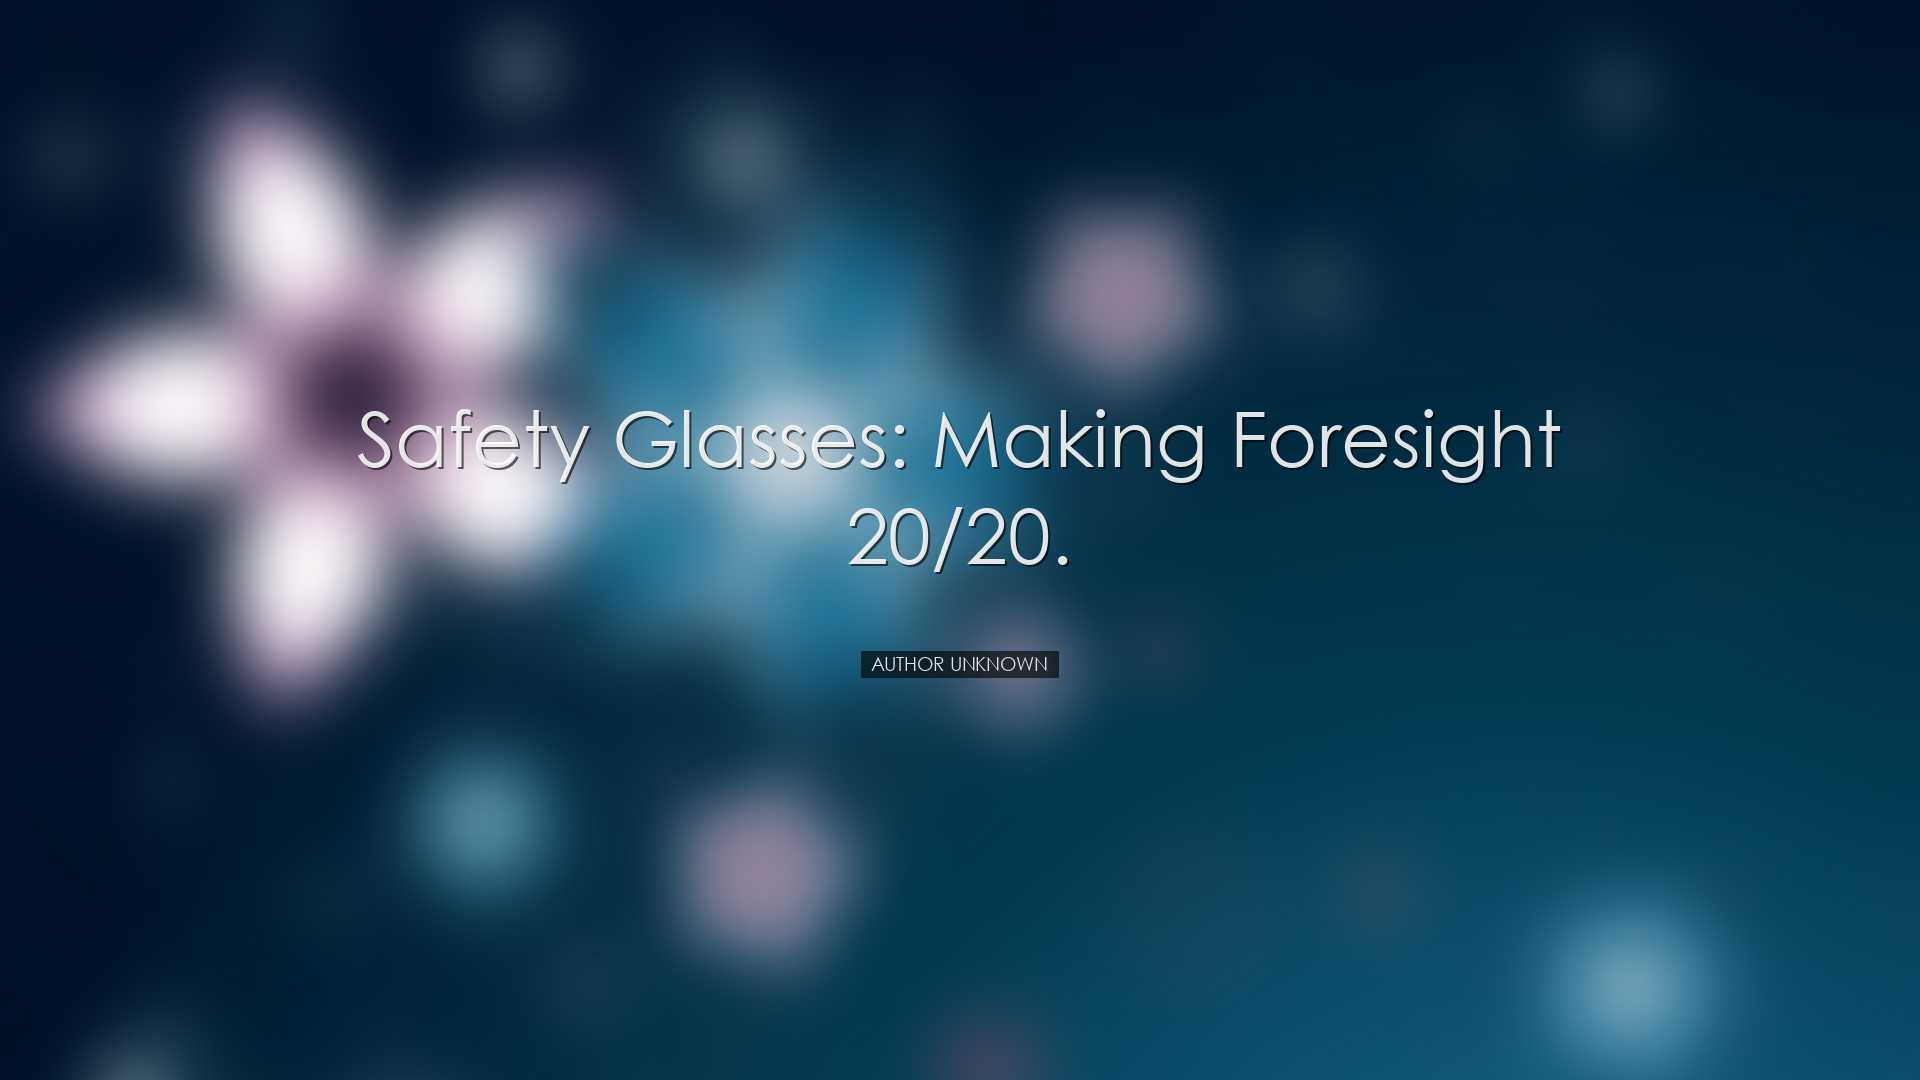 Safety glasses: making foresight 20/20. - Author unknown